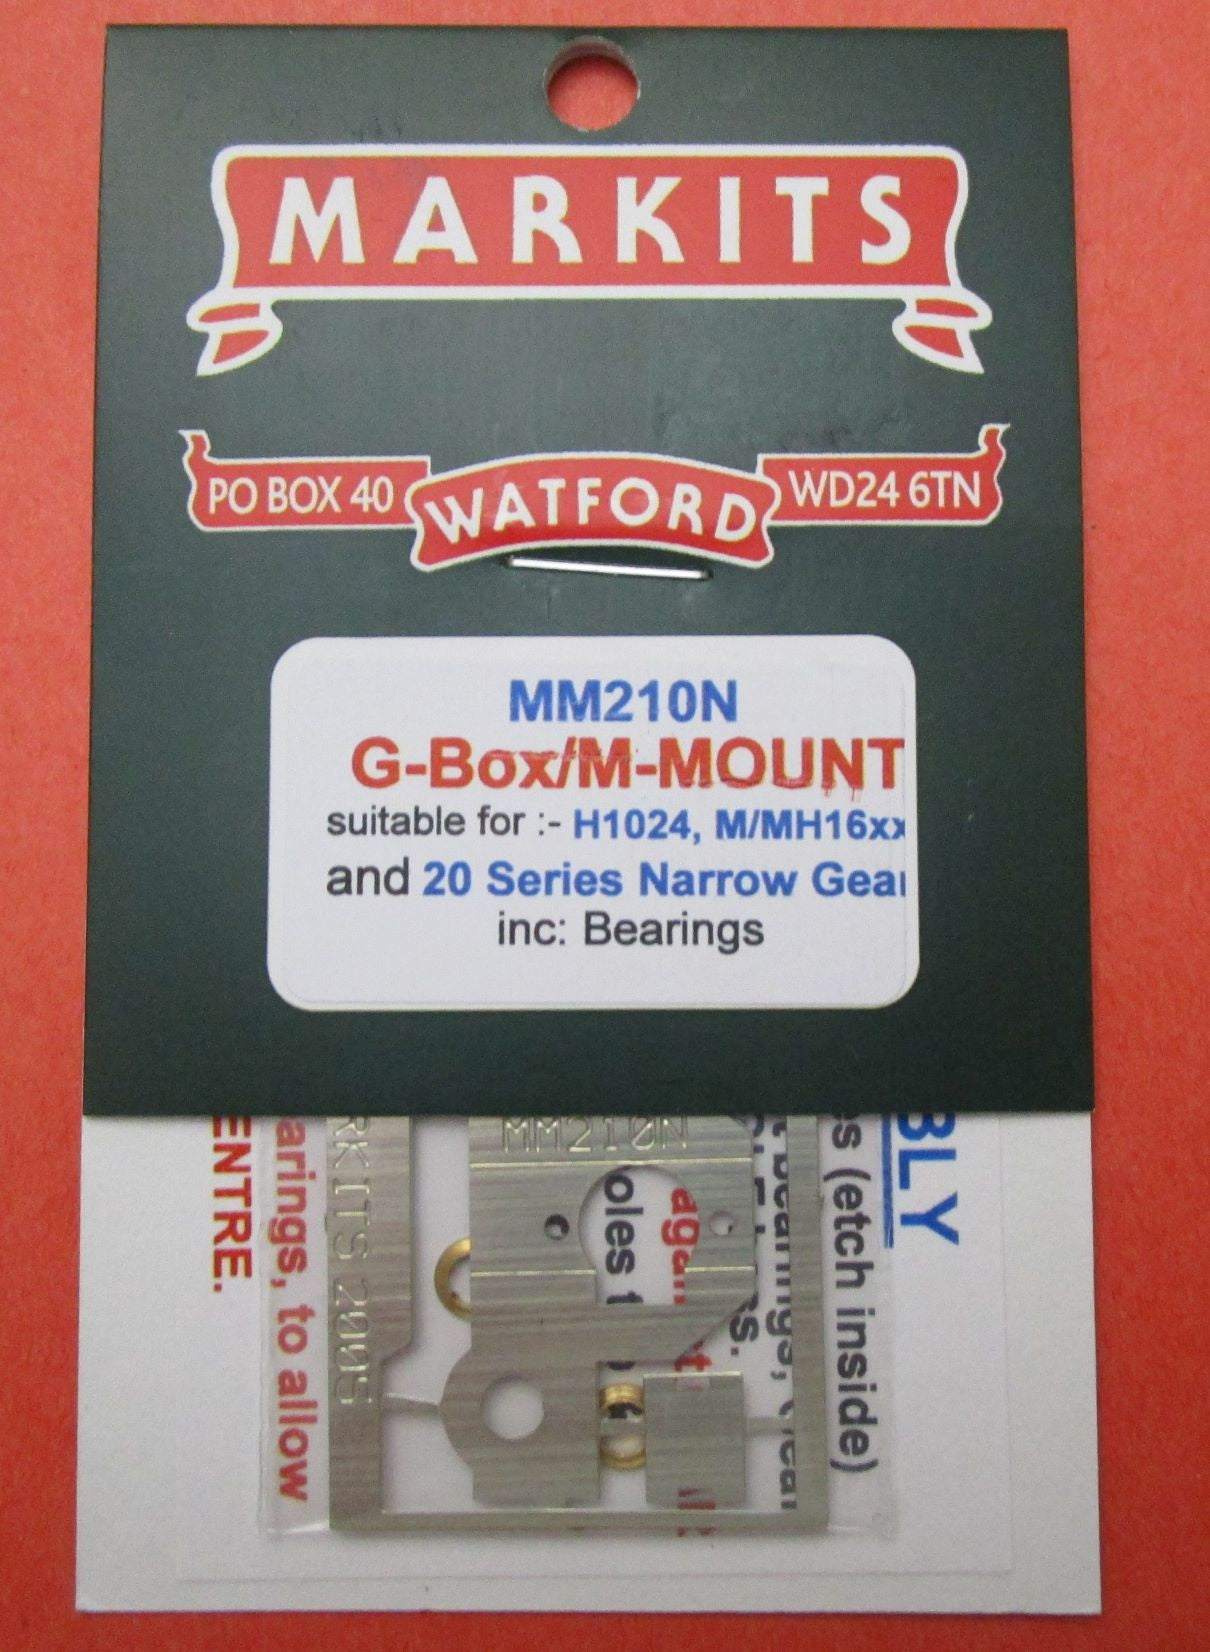 MM210n MARKITS Motor mount and bearings for H1024 Series 20 10mm Mounting Holes, NARROW 1/8in Axle